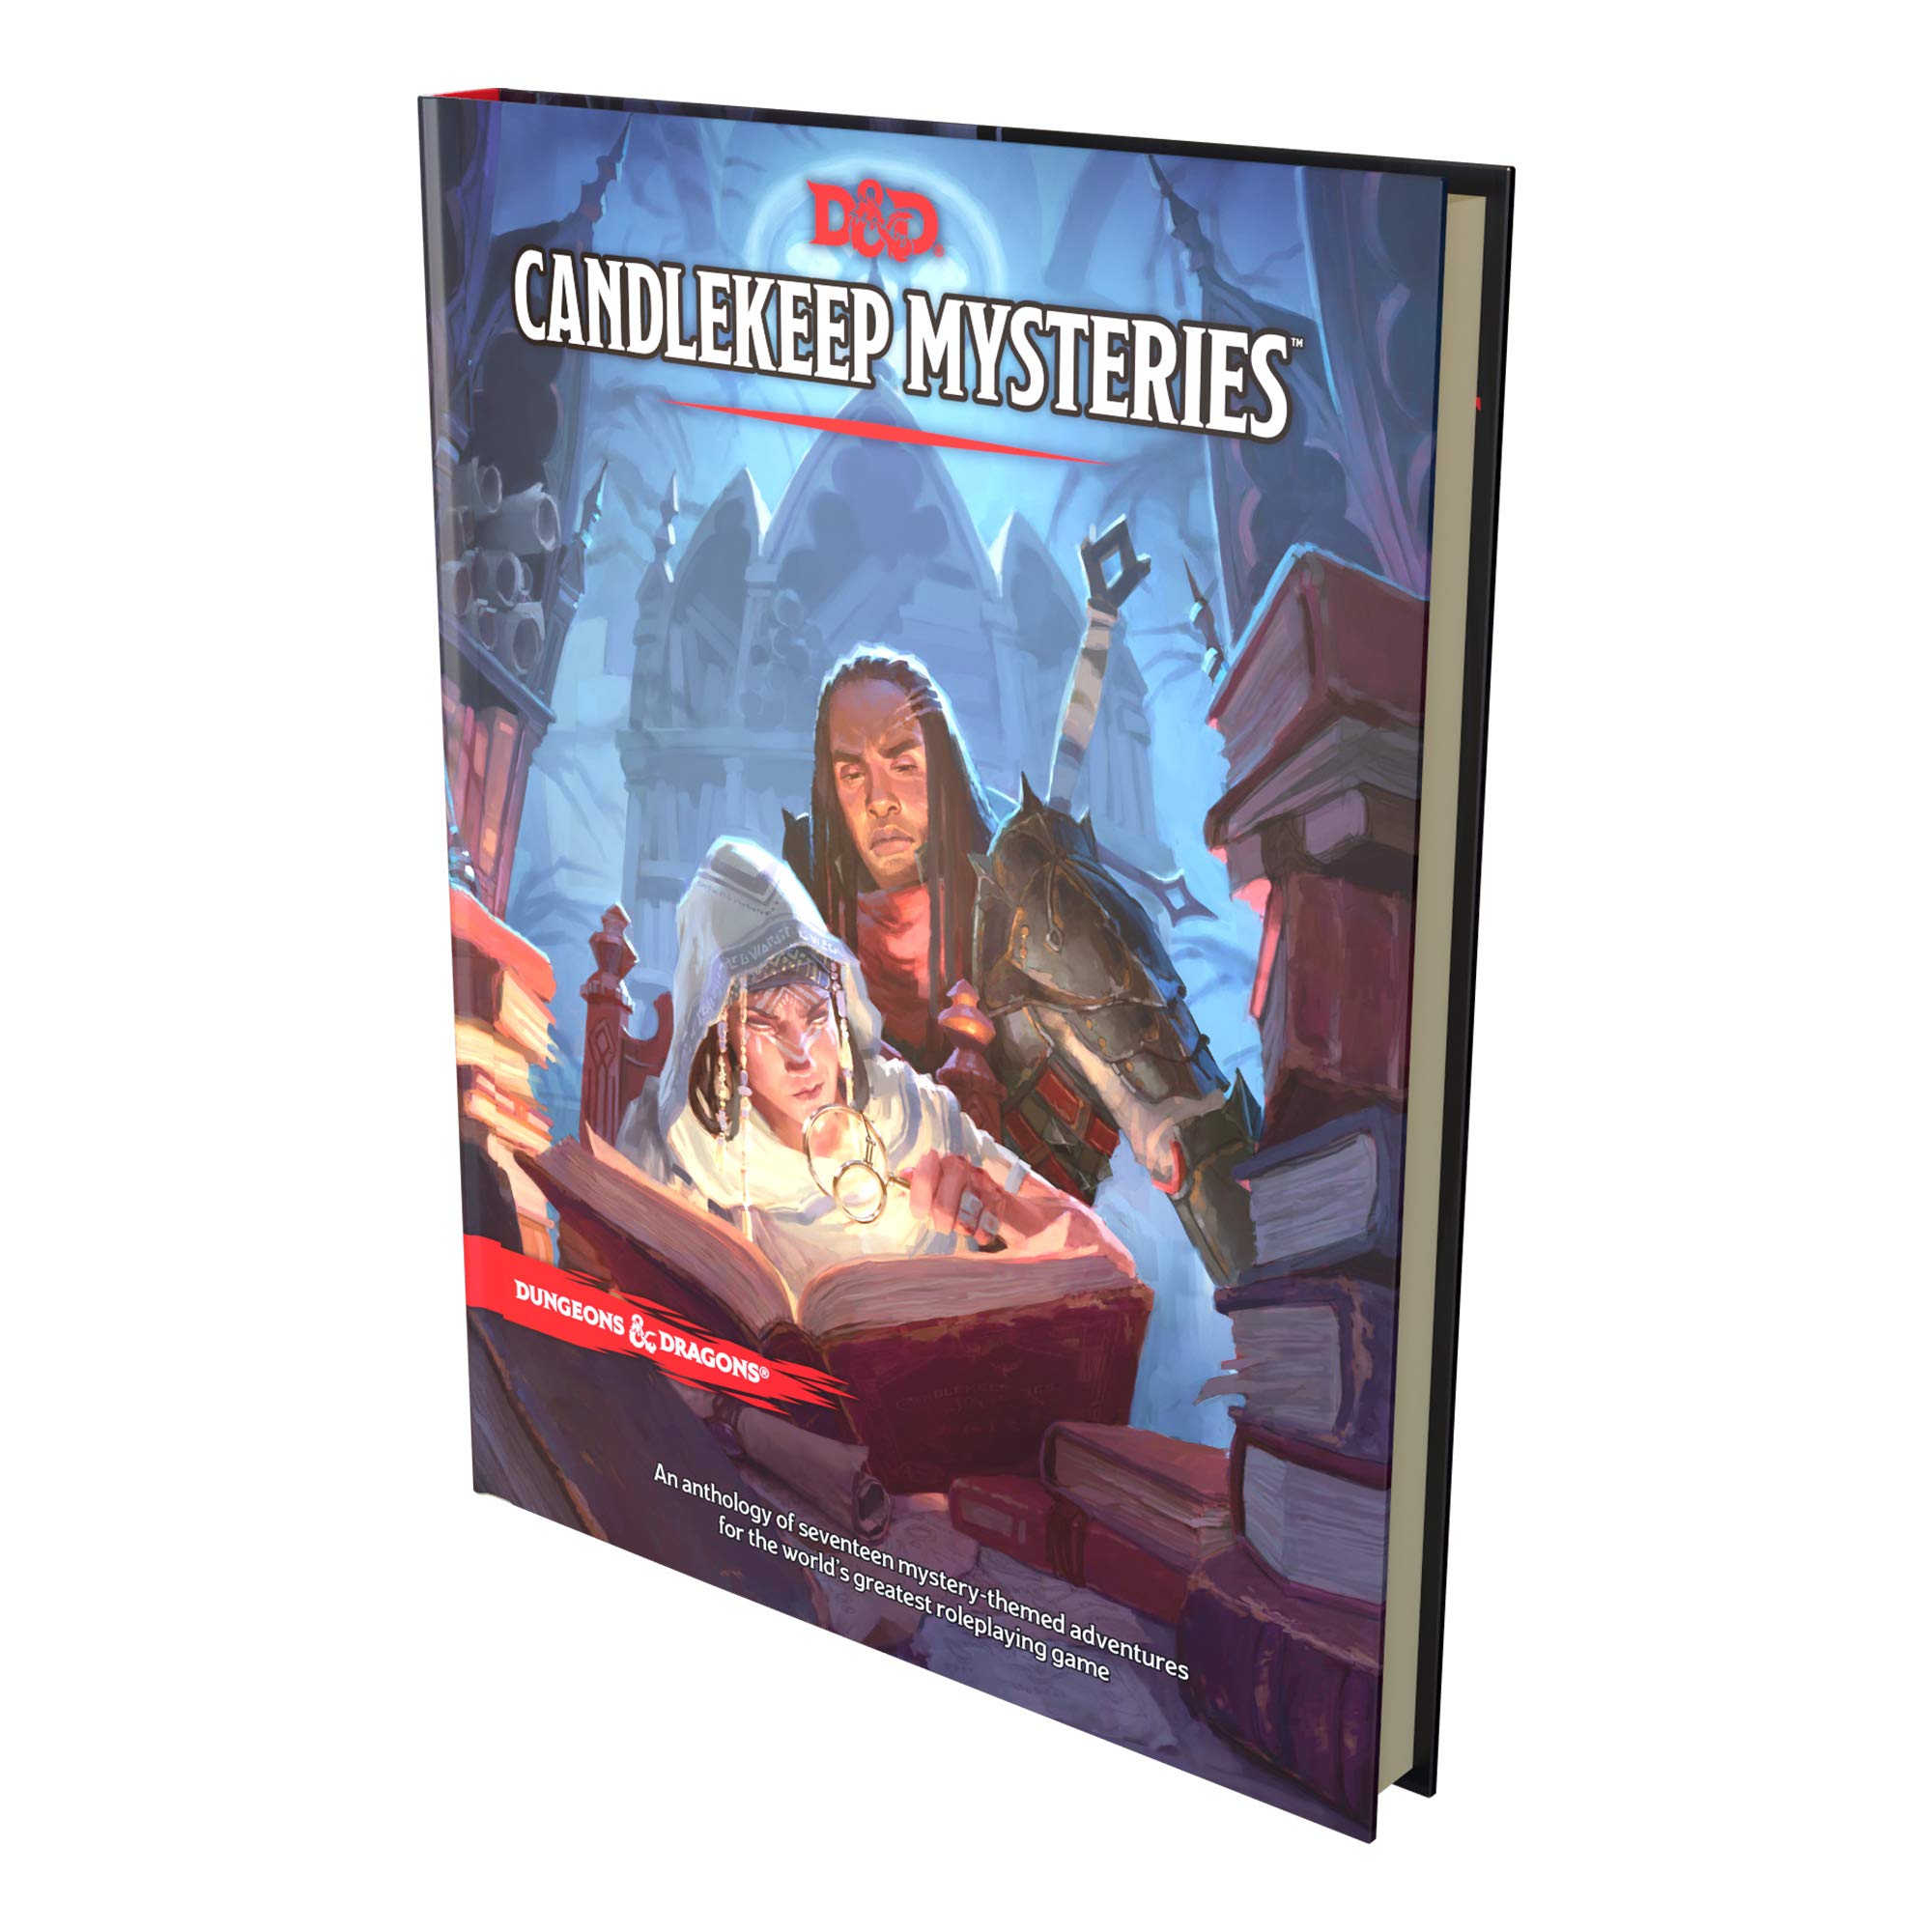 Candlekeep Mysteries (D&D Adventure Book - Dungeons & Dragons) (Dungeons and Dragons)